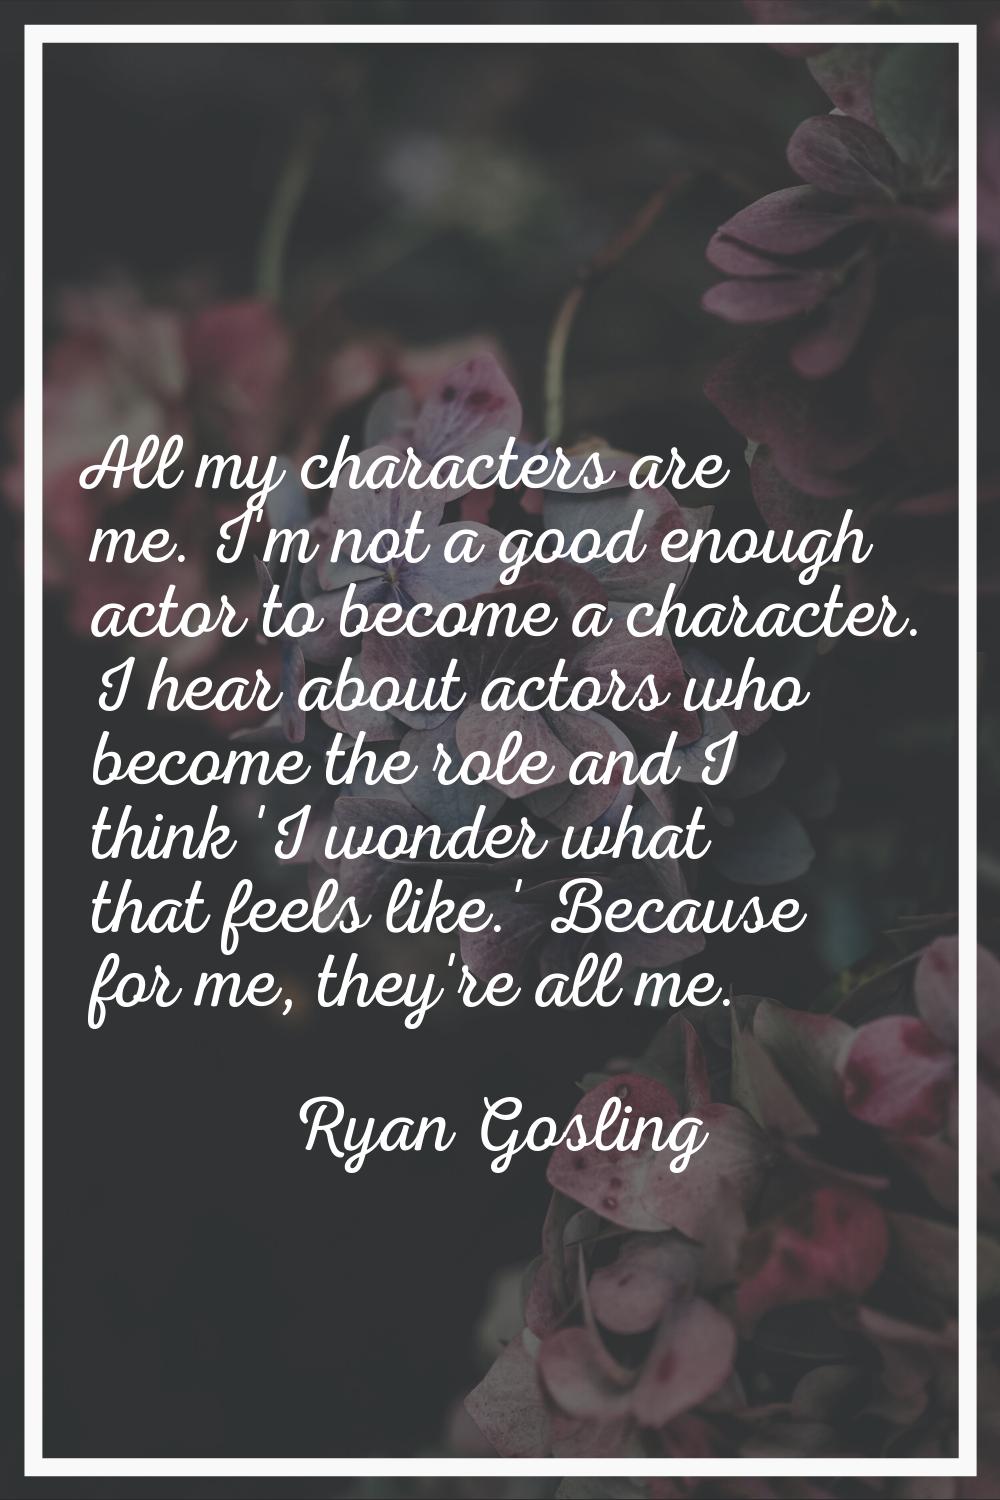 All my characters are me. I'm not a good enough actor to become a character. I hear about actors wh